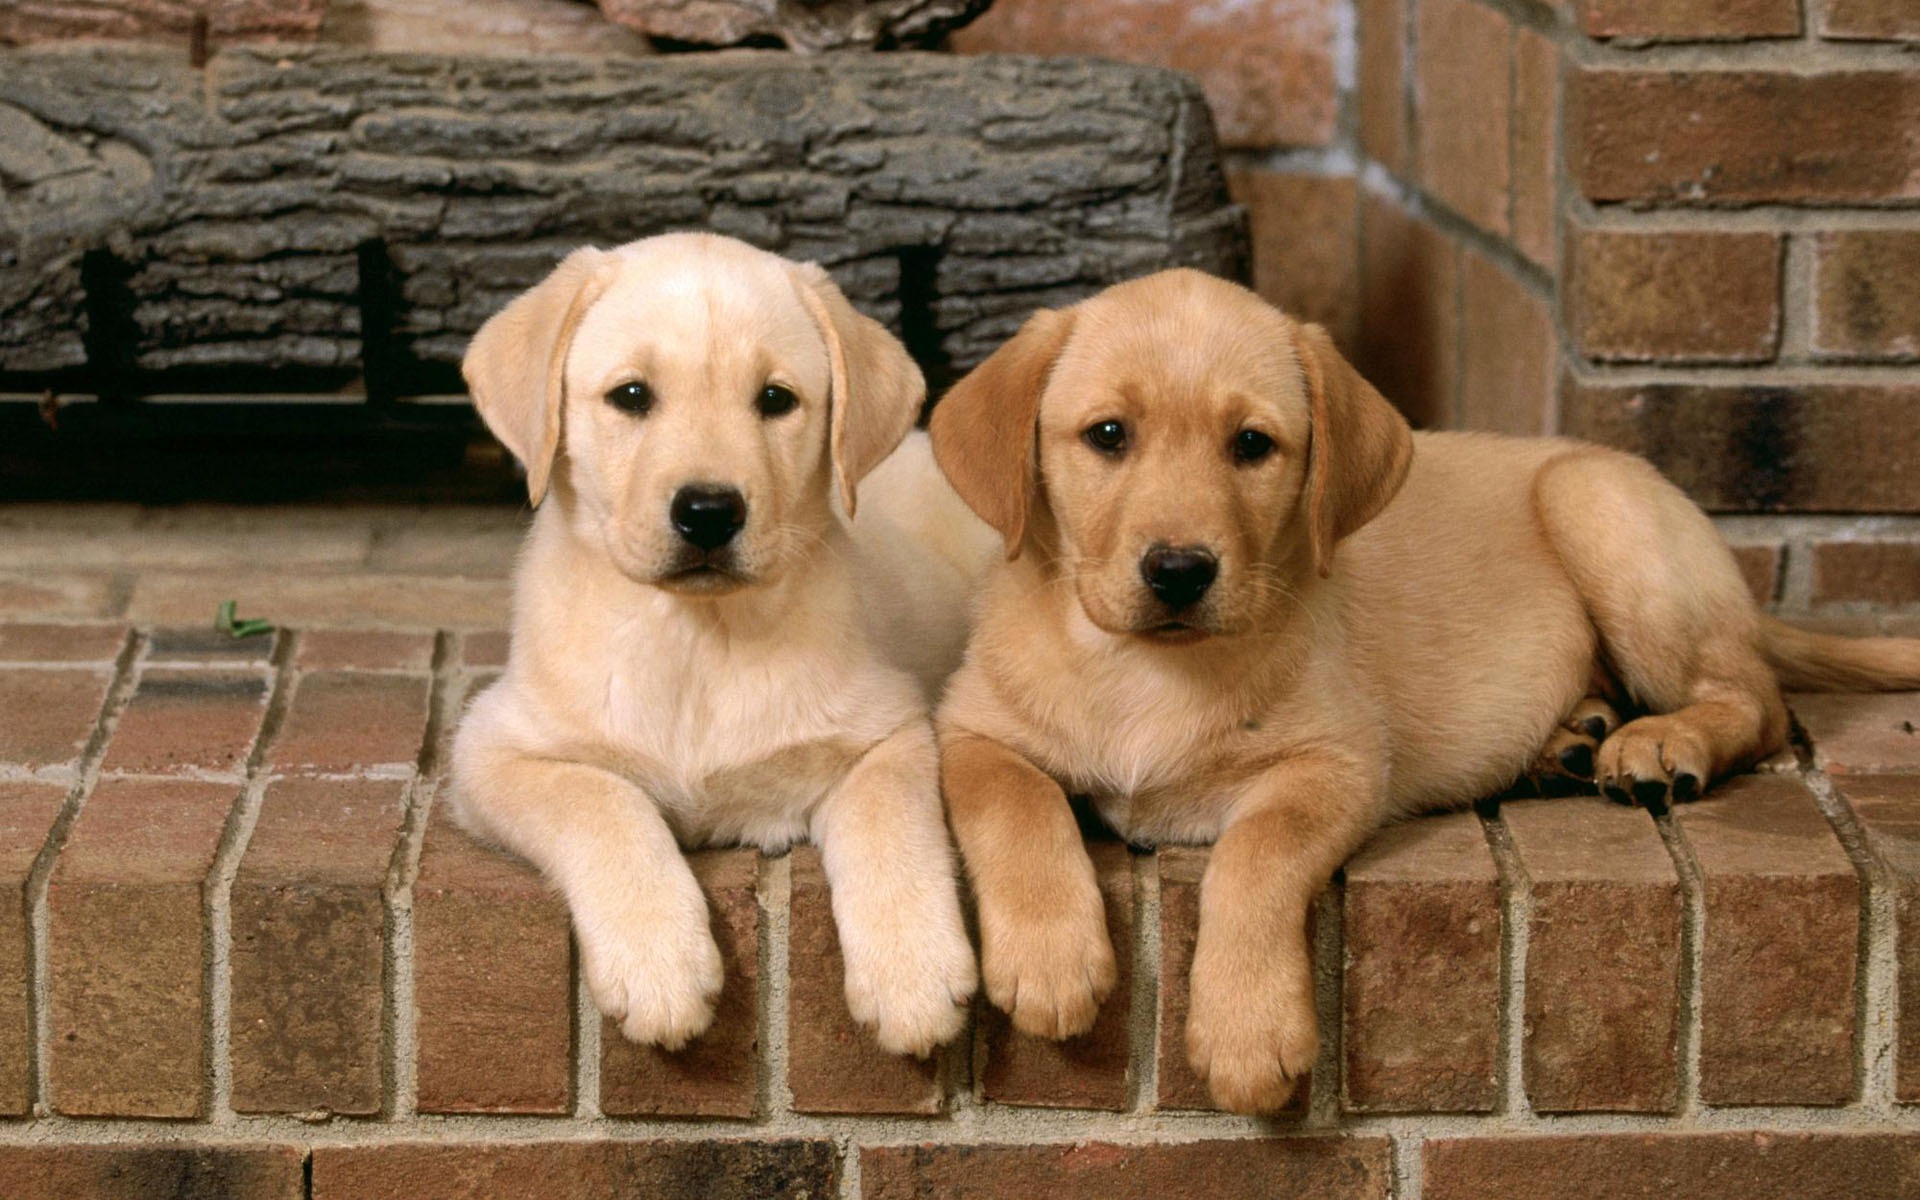 Puppy Photo HD wallpapers (2) #11 - 1920x1200